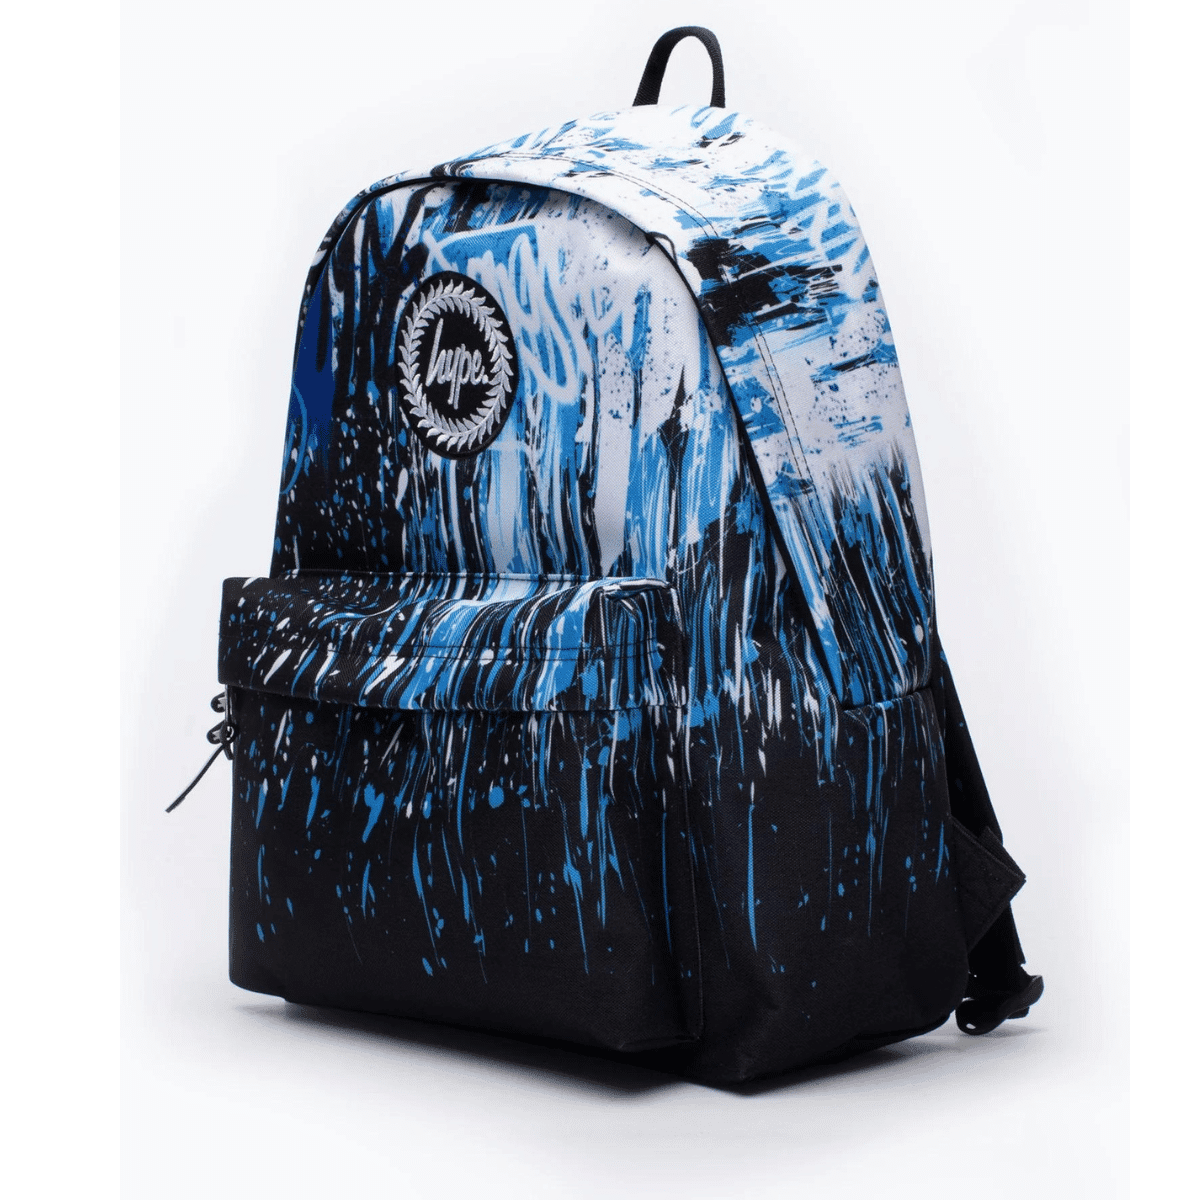 hype rucksack with blue and white graffiti design